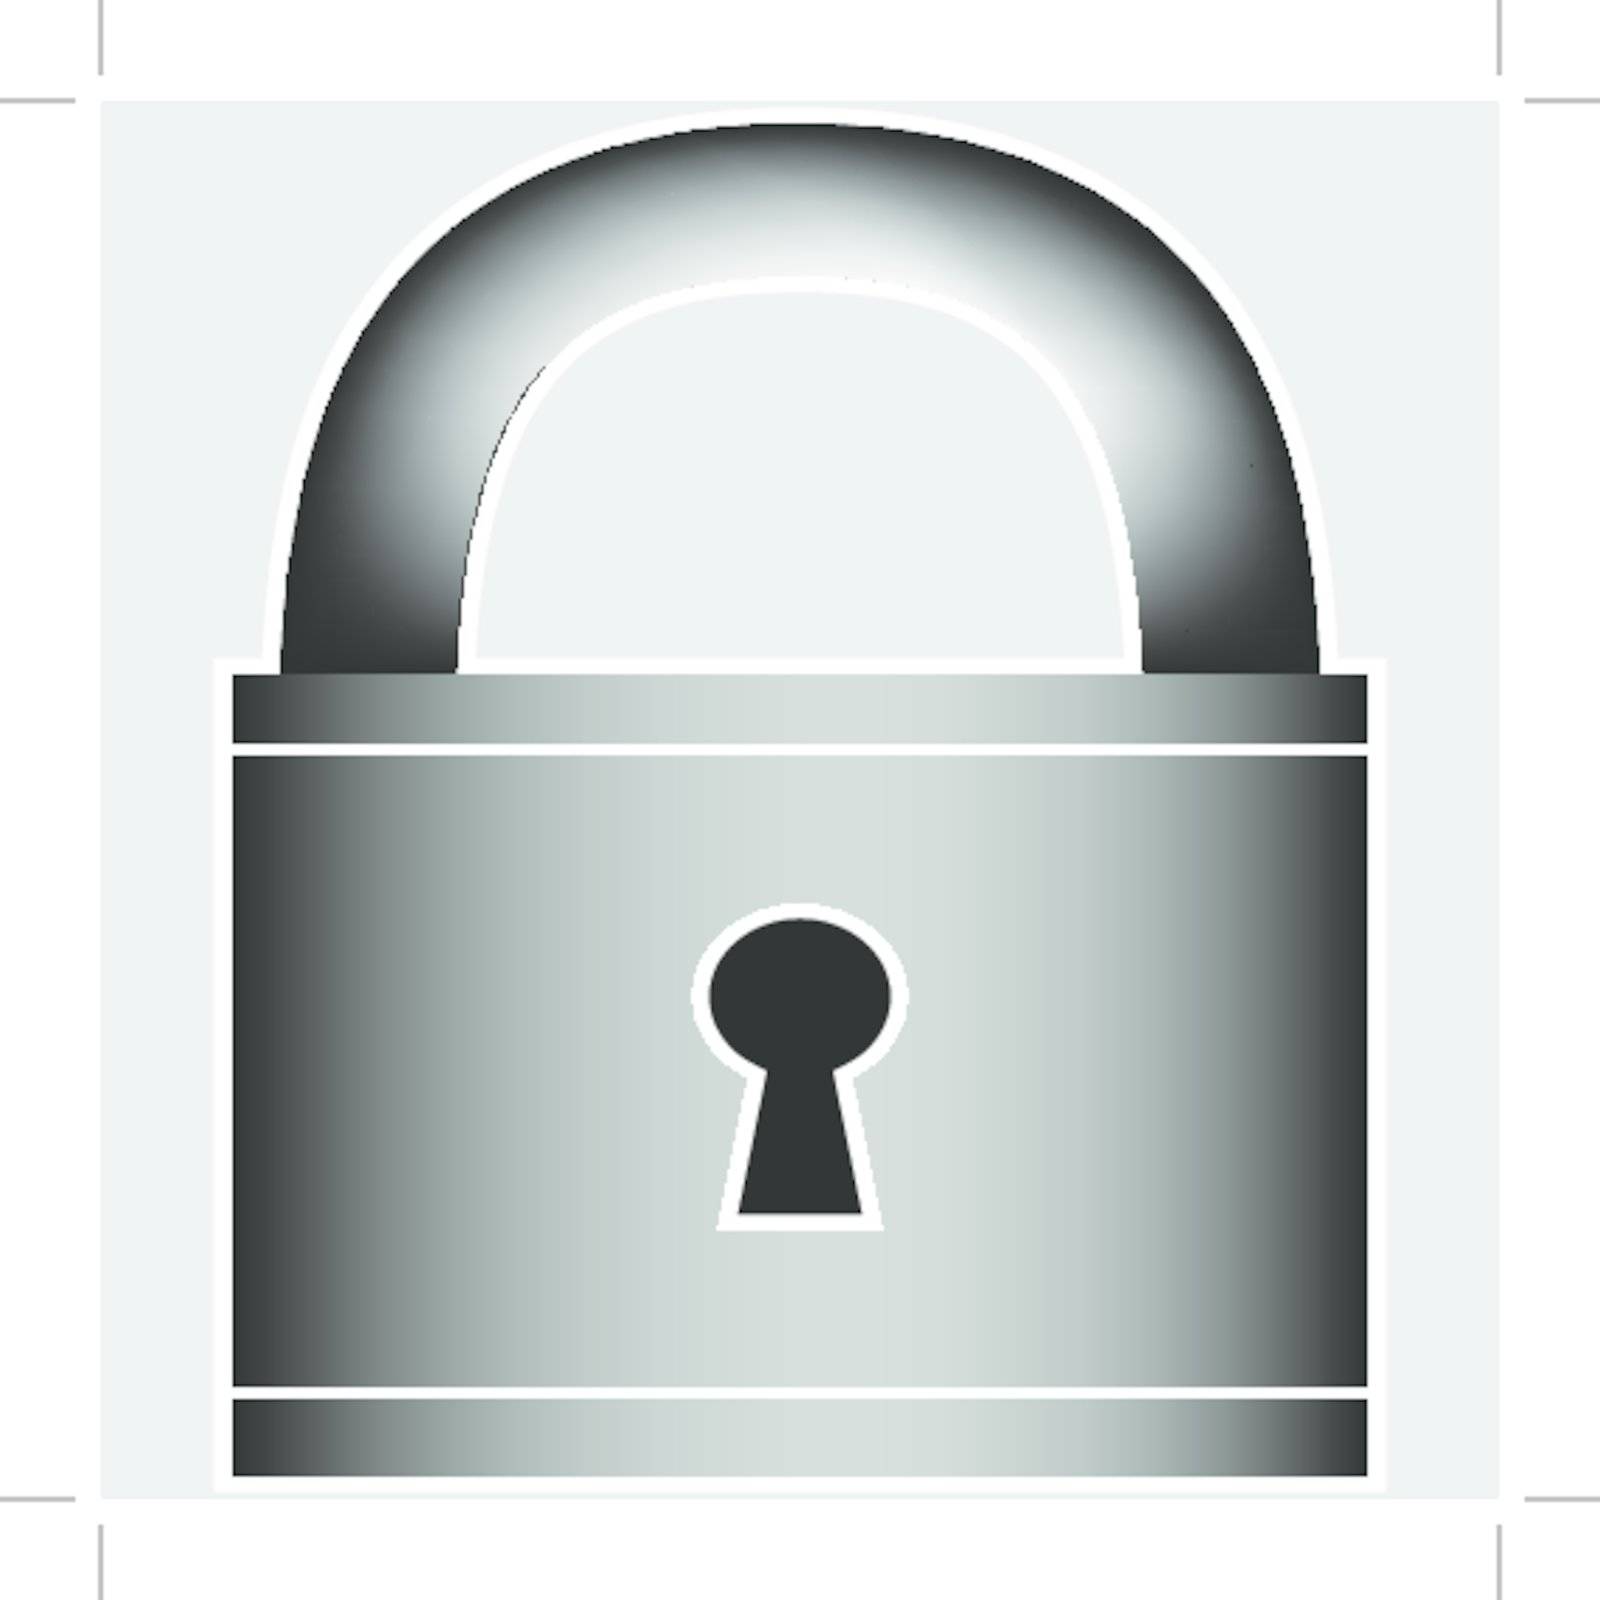 Padlock Security Icon by cteconsulting